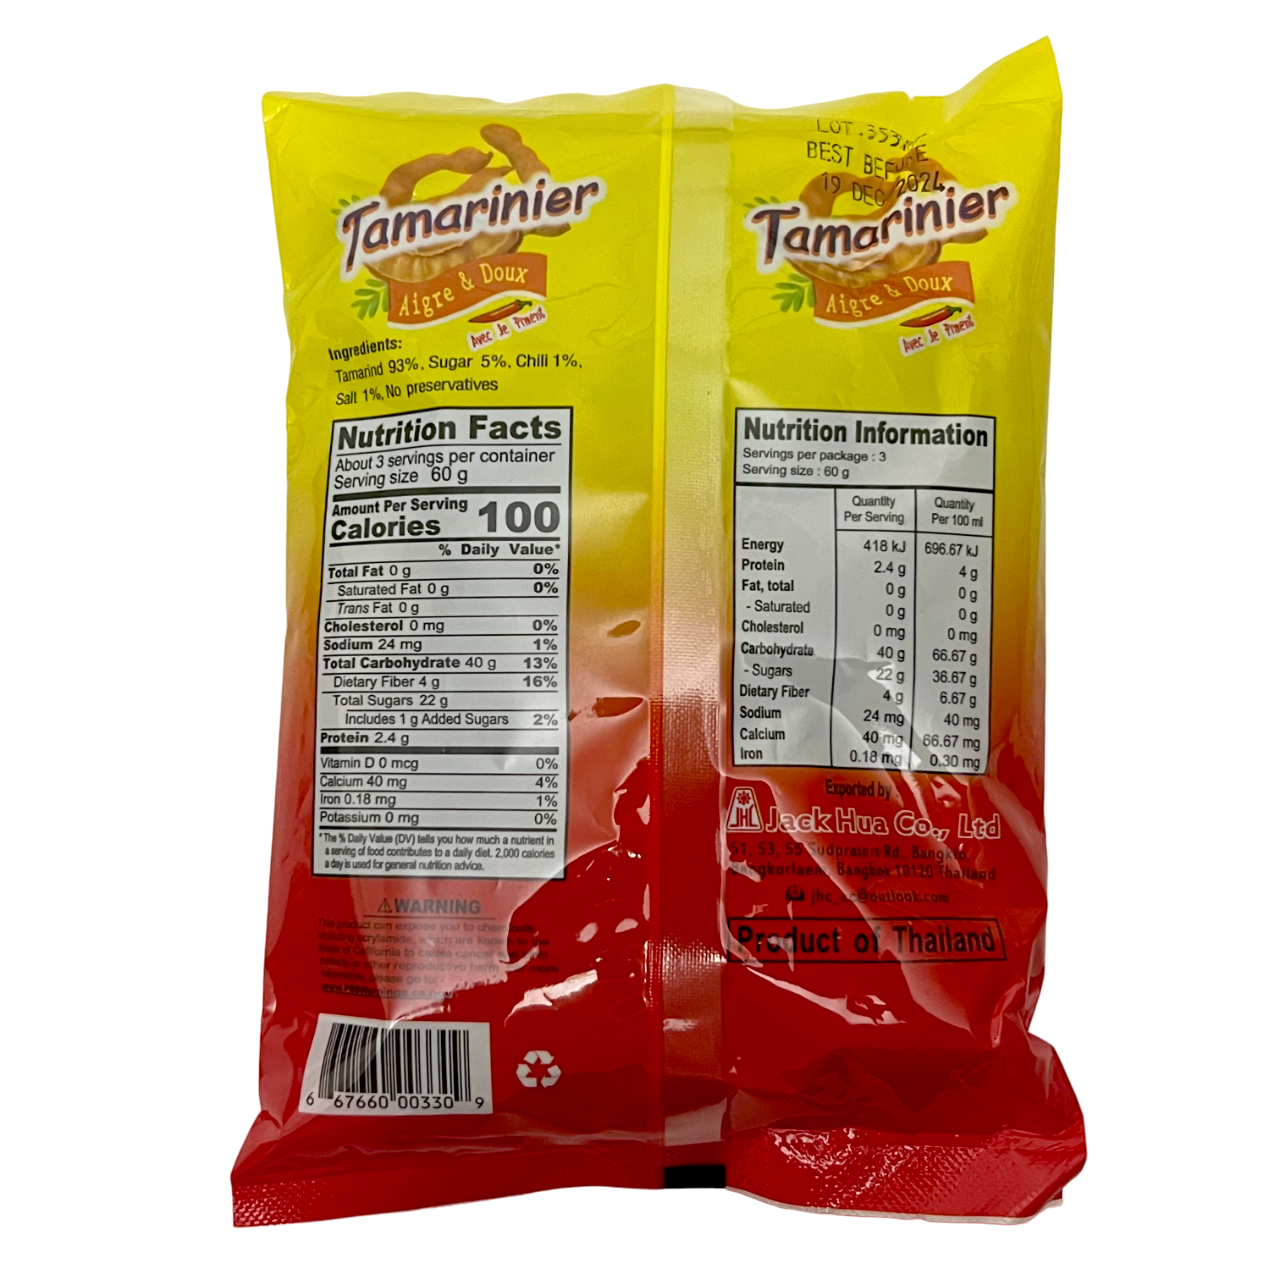 JHL Thai Tamarind Candy Sweet and Sour with Chili